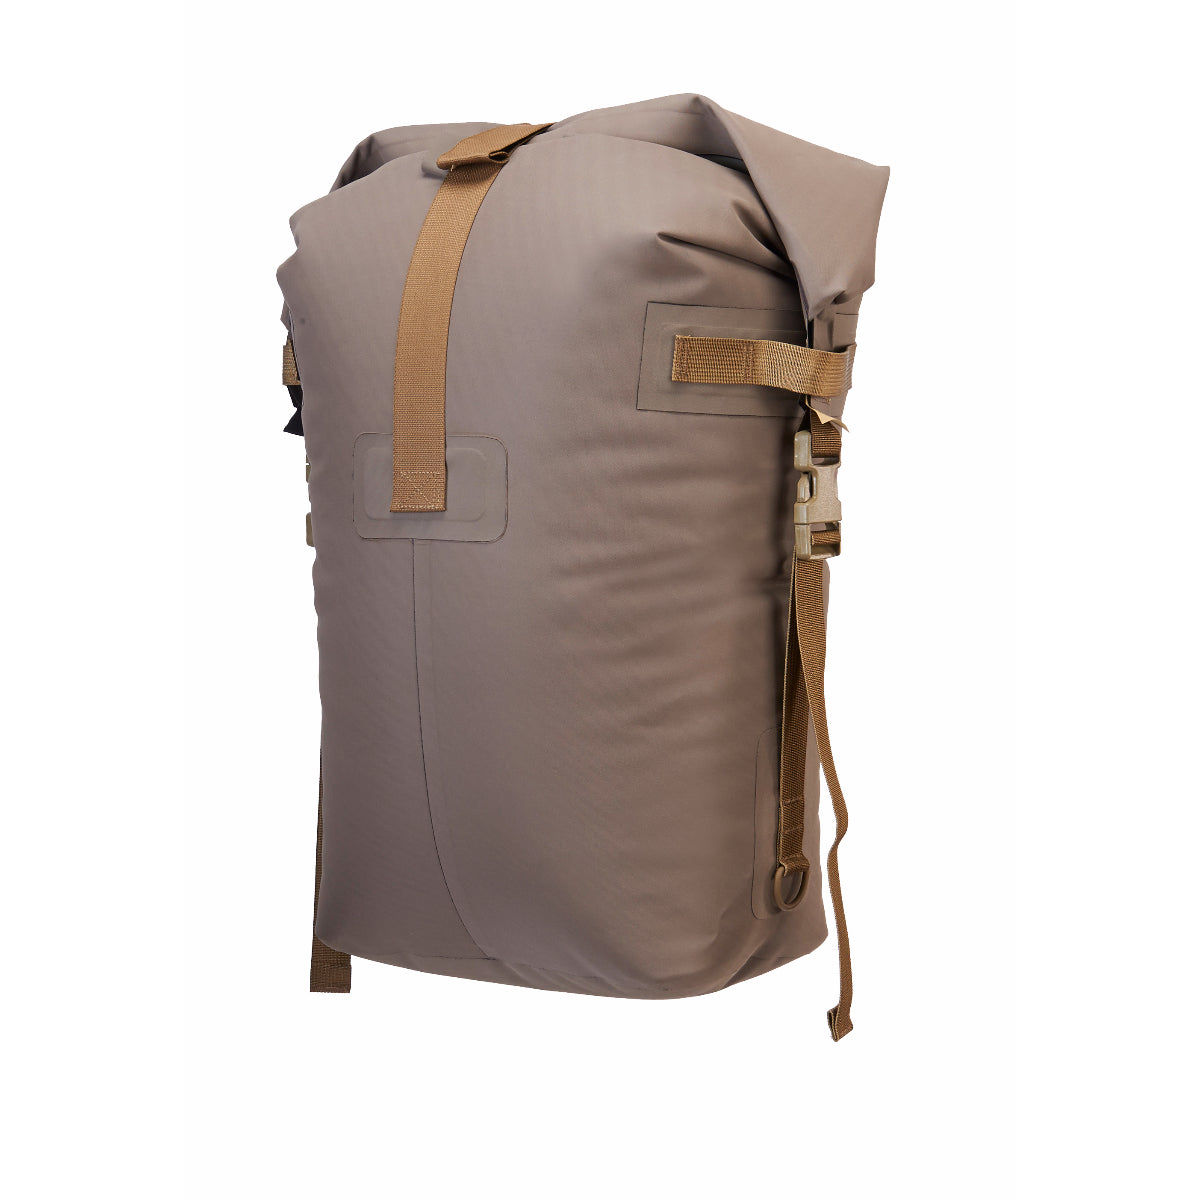 Watershed 3 Day Pack Liner